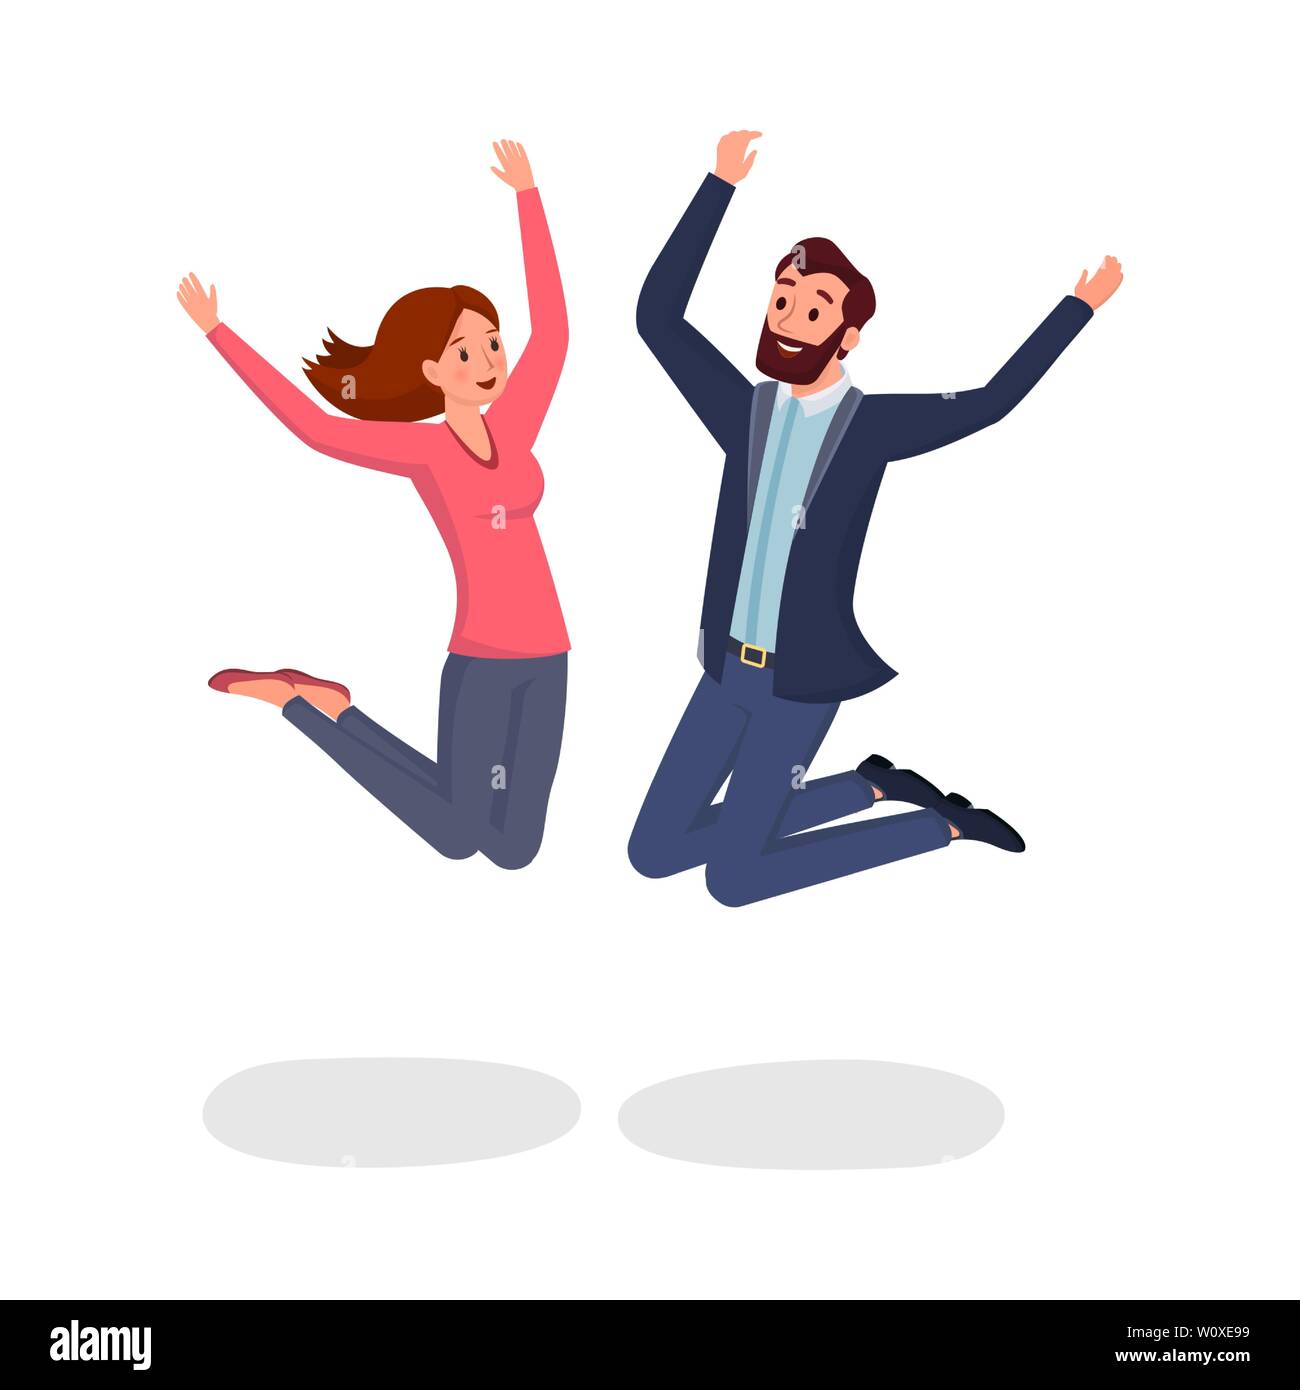 Jumping colleagues flat vector illustration. Two friends, man and woman leaping in excitement and joy cartoon characters. Cheerful youth, jump laughing with raised hands isolated on white background Stock Vector